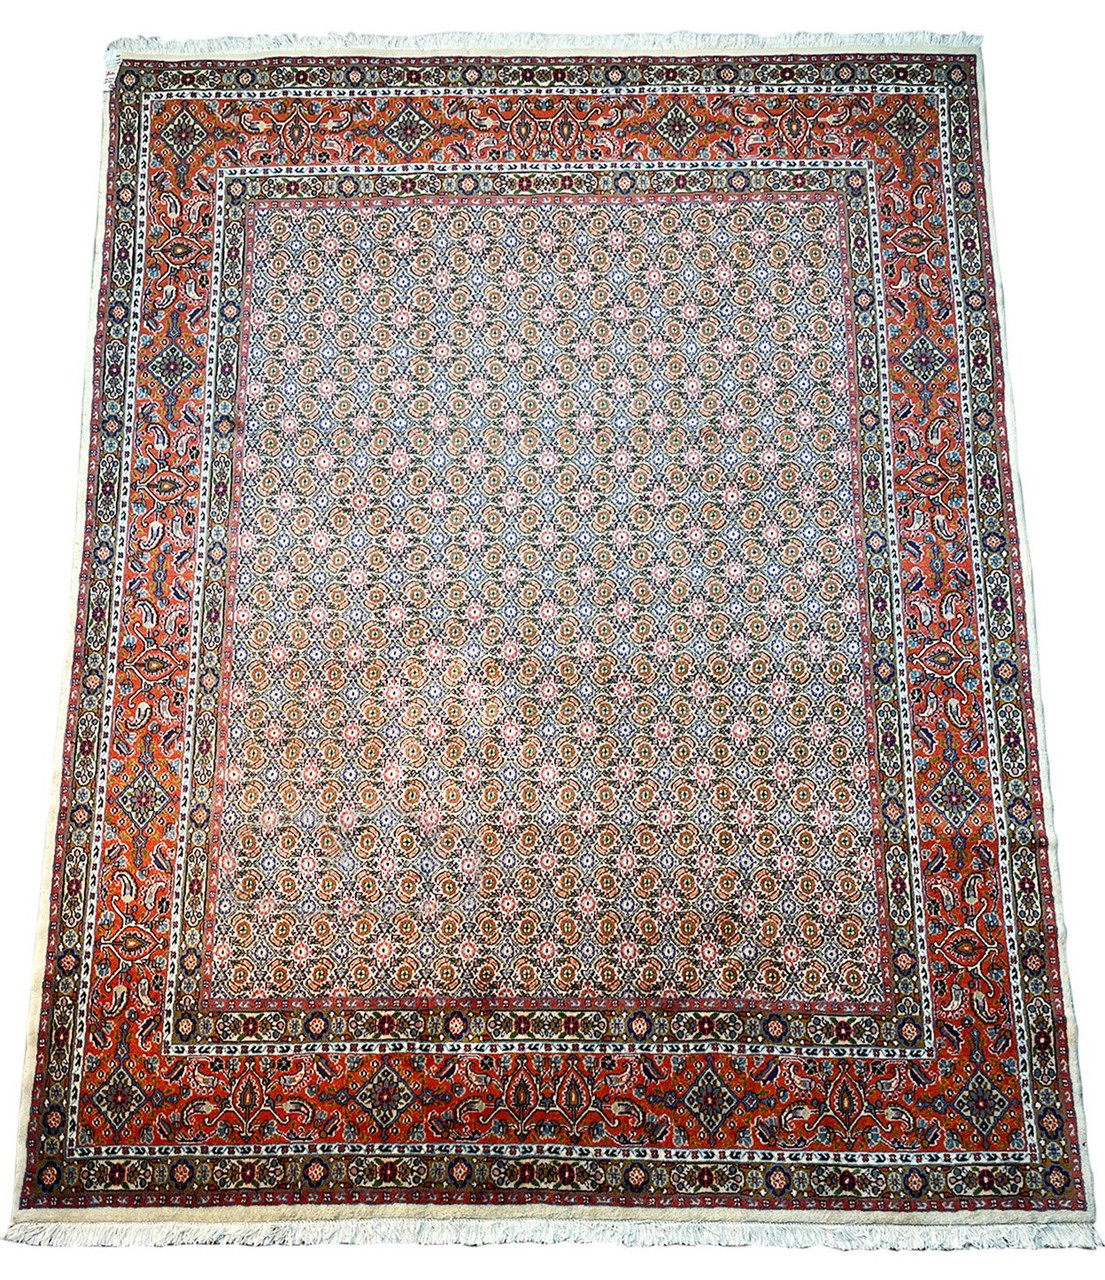 6'4" x 8'2" Persian Moud All-Over Design Rug